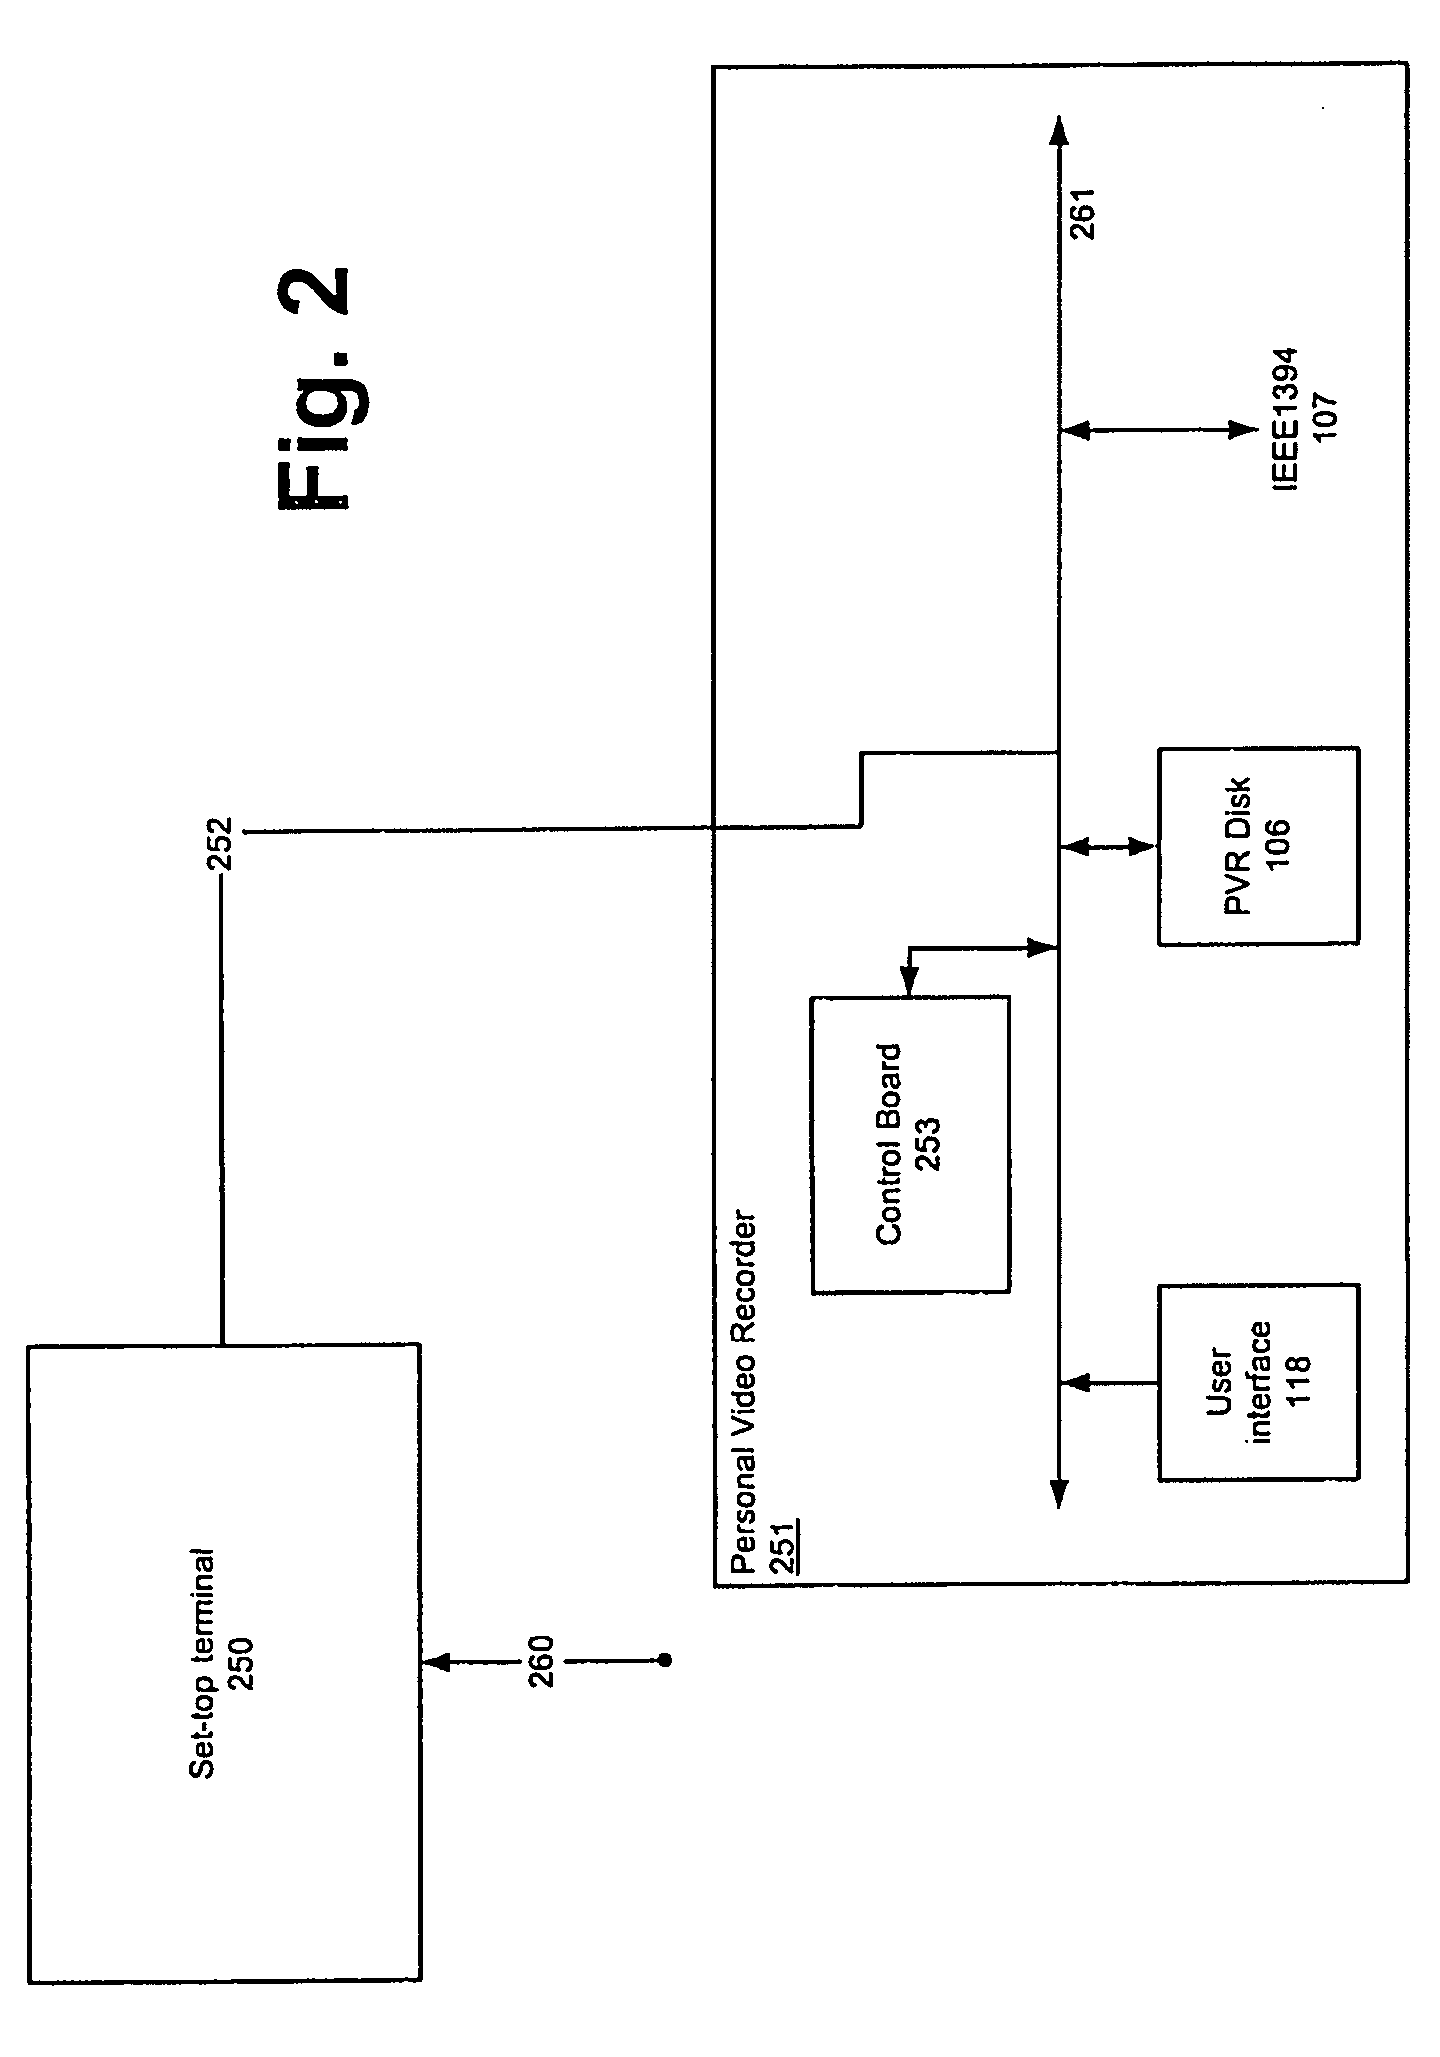 Personal versatile recorder and method of implementing and using same